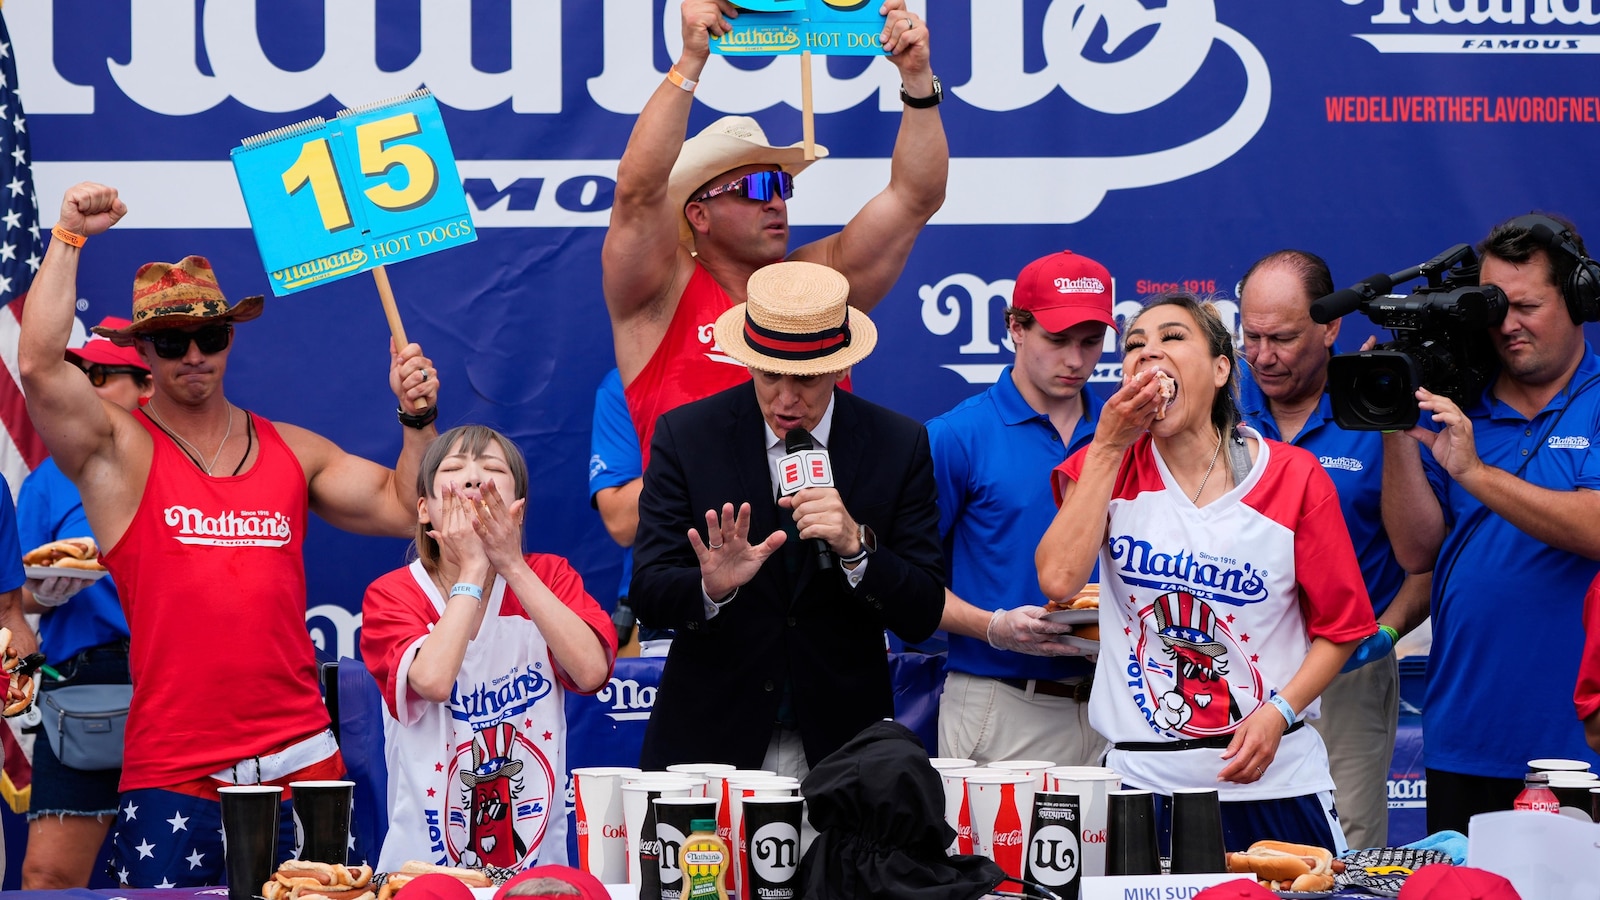 Defending champion Miki Sudo wins women's division of Nathan's hot dog eating contest